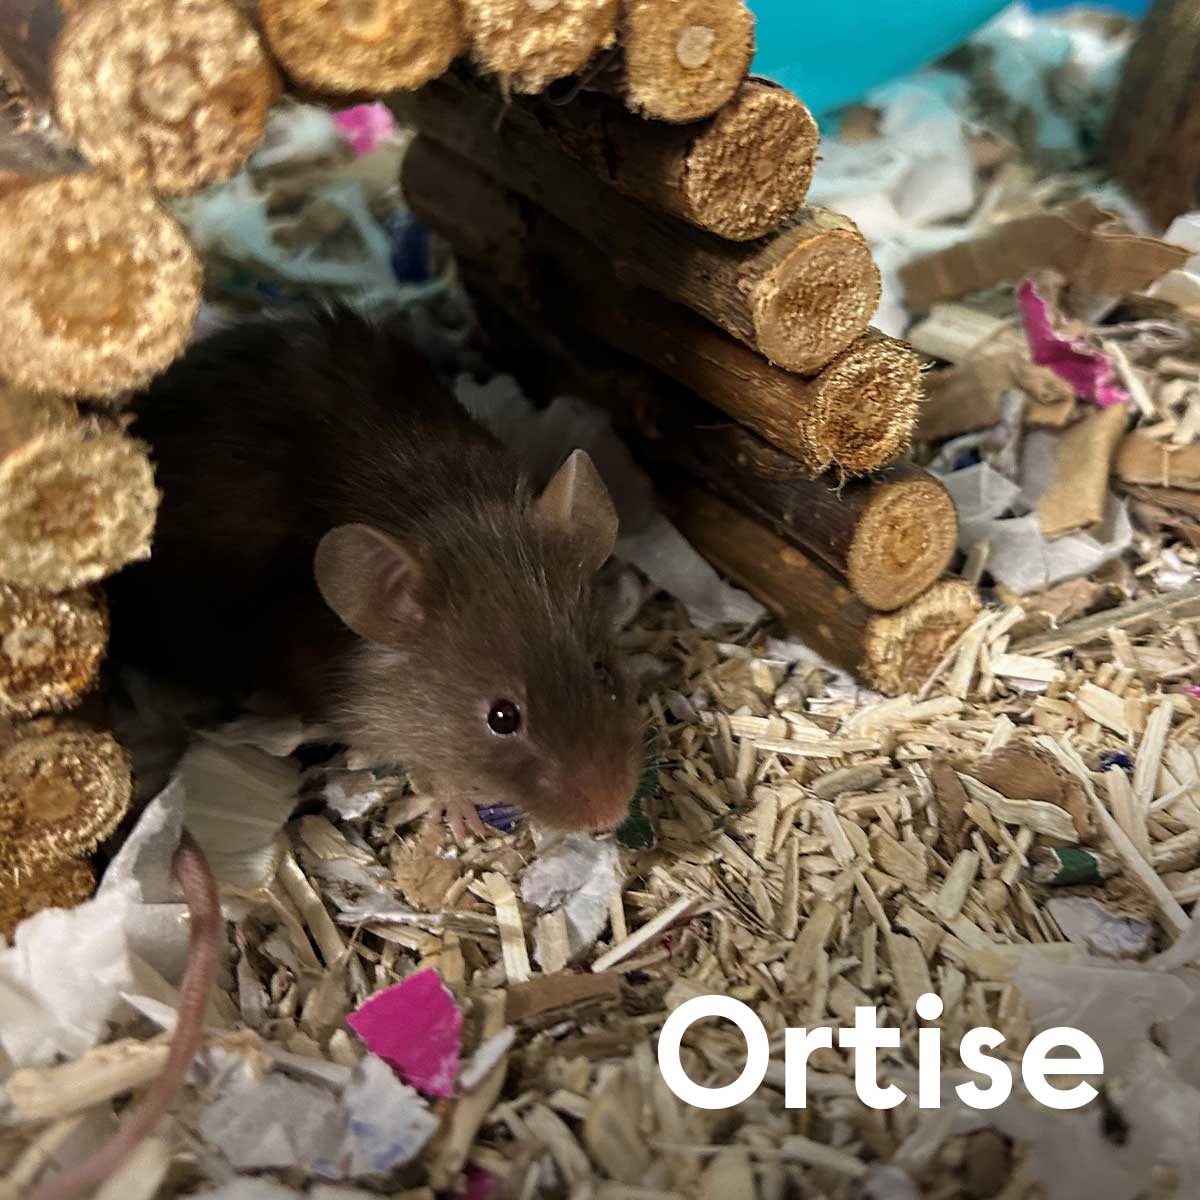 Go on put your hands up for our superstar mice Aston, JB, Marvin and Ortese (inspired by @JLSOfficial) who have found a home! We’re sending our furry friends the best of luck! #RescueRodents